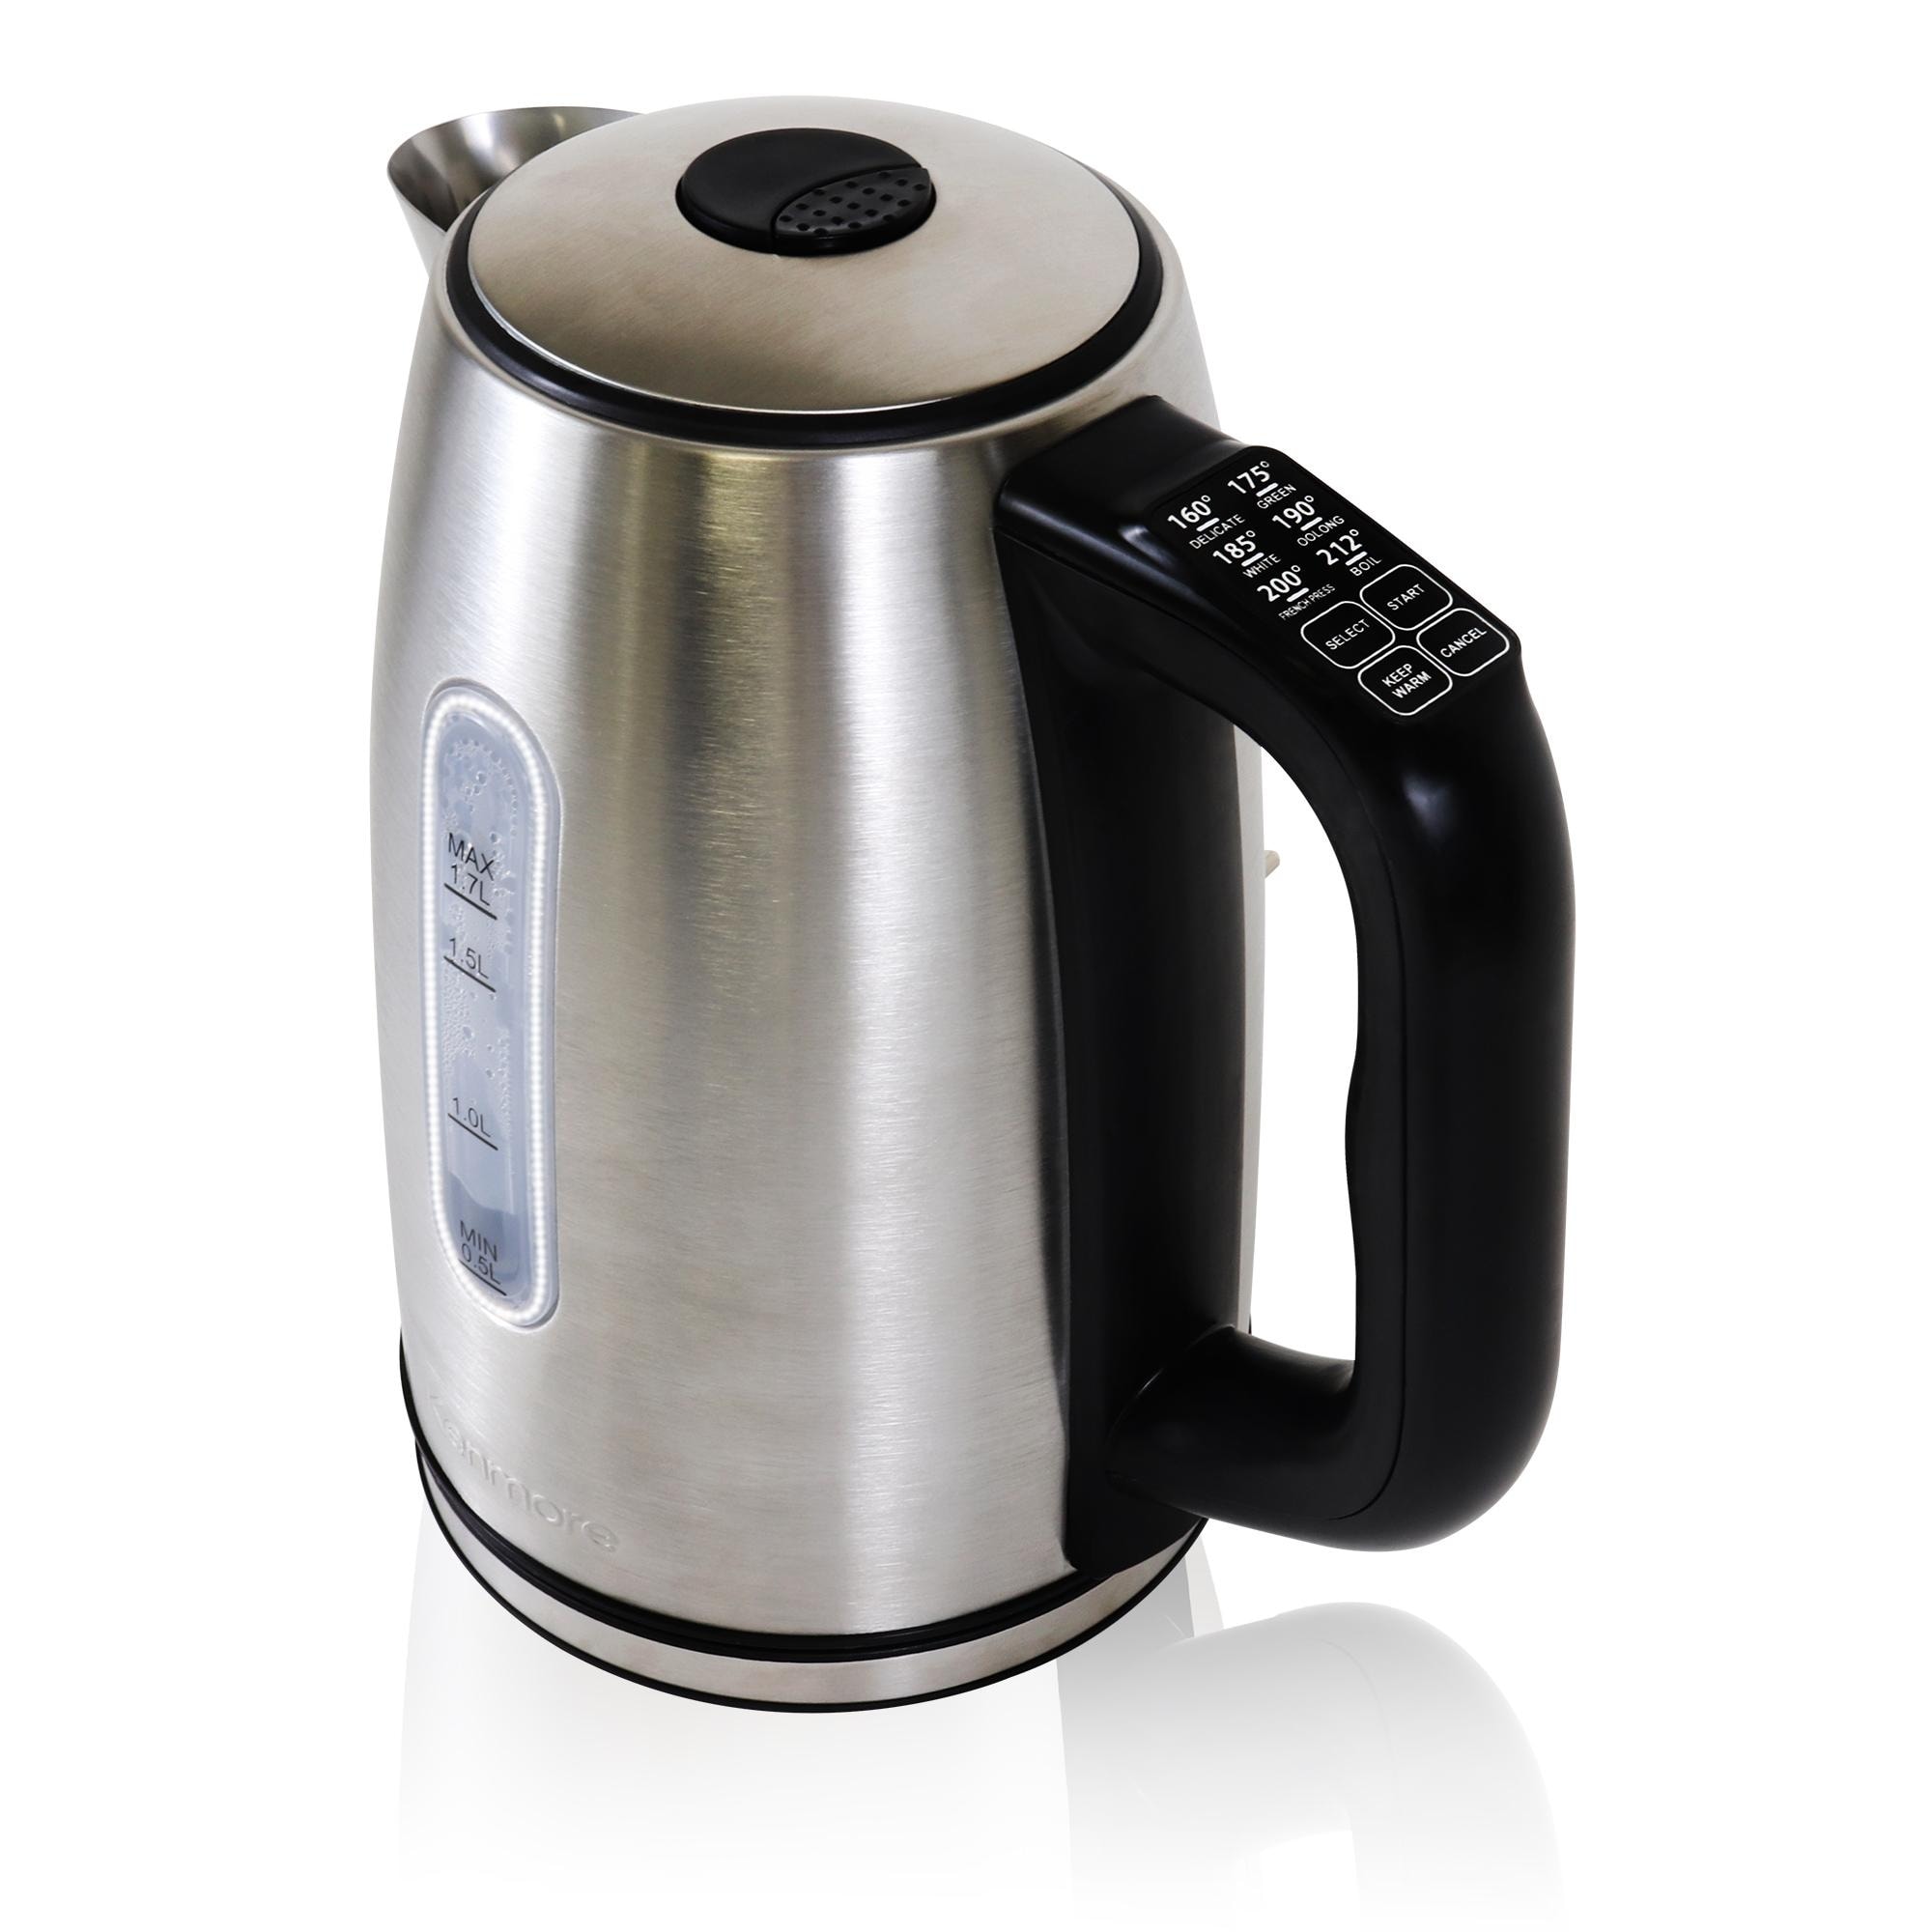 https://ak1.ostkcdn.com/images/products/is/images/direct/005ccd77e7fefb11585aa4d14bddf3fa56be37a9/Kenmore-1.7L-Cordless-Electric-Kettle-w--6-Temperature-Pre-Sets%2C-Stainless-Steel-Teakettle.jpg